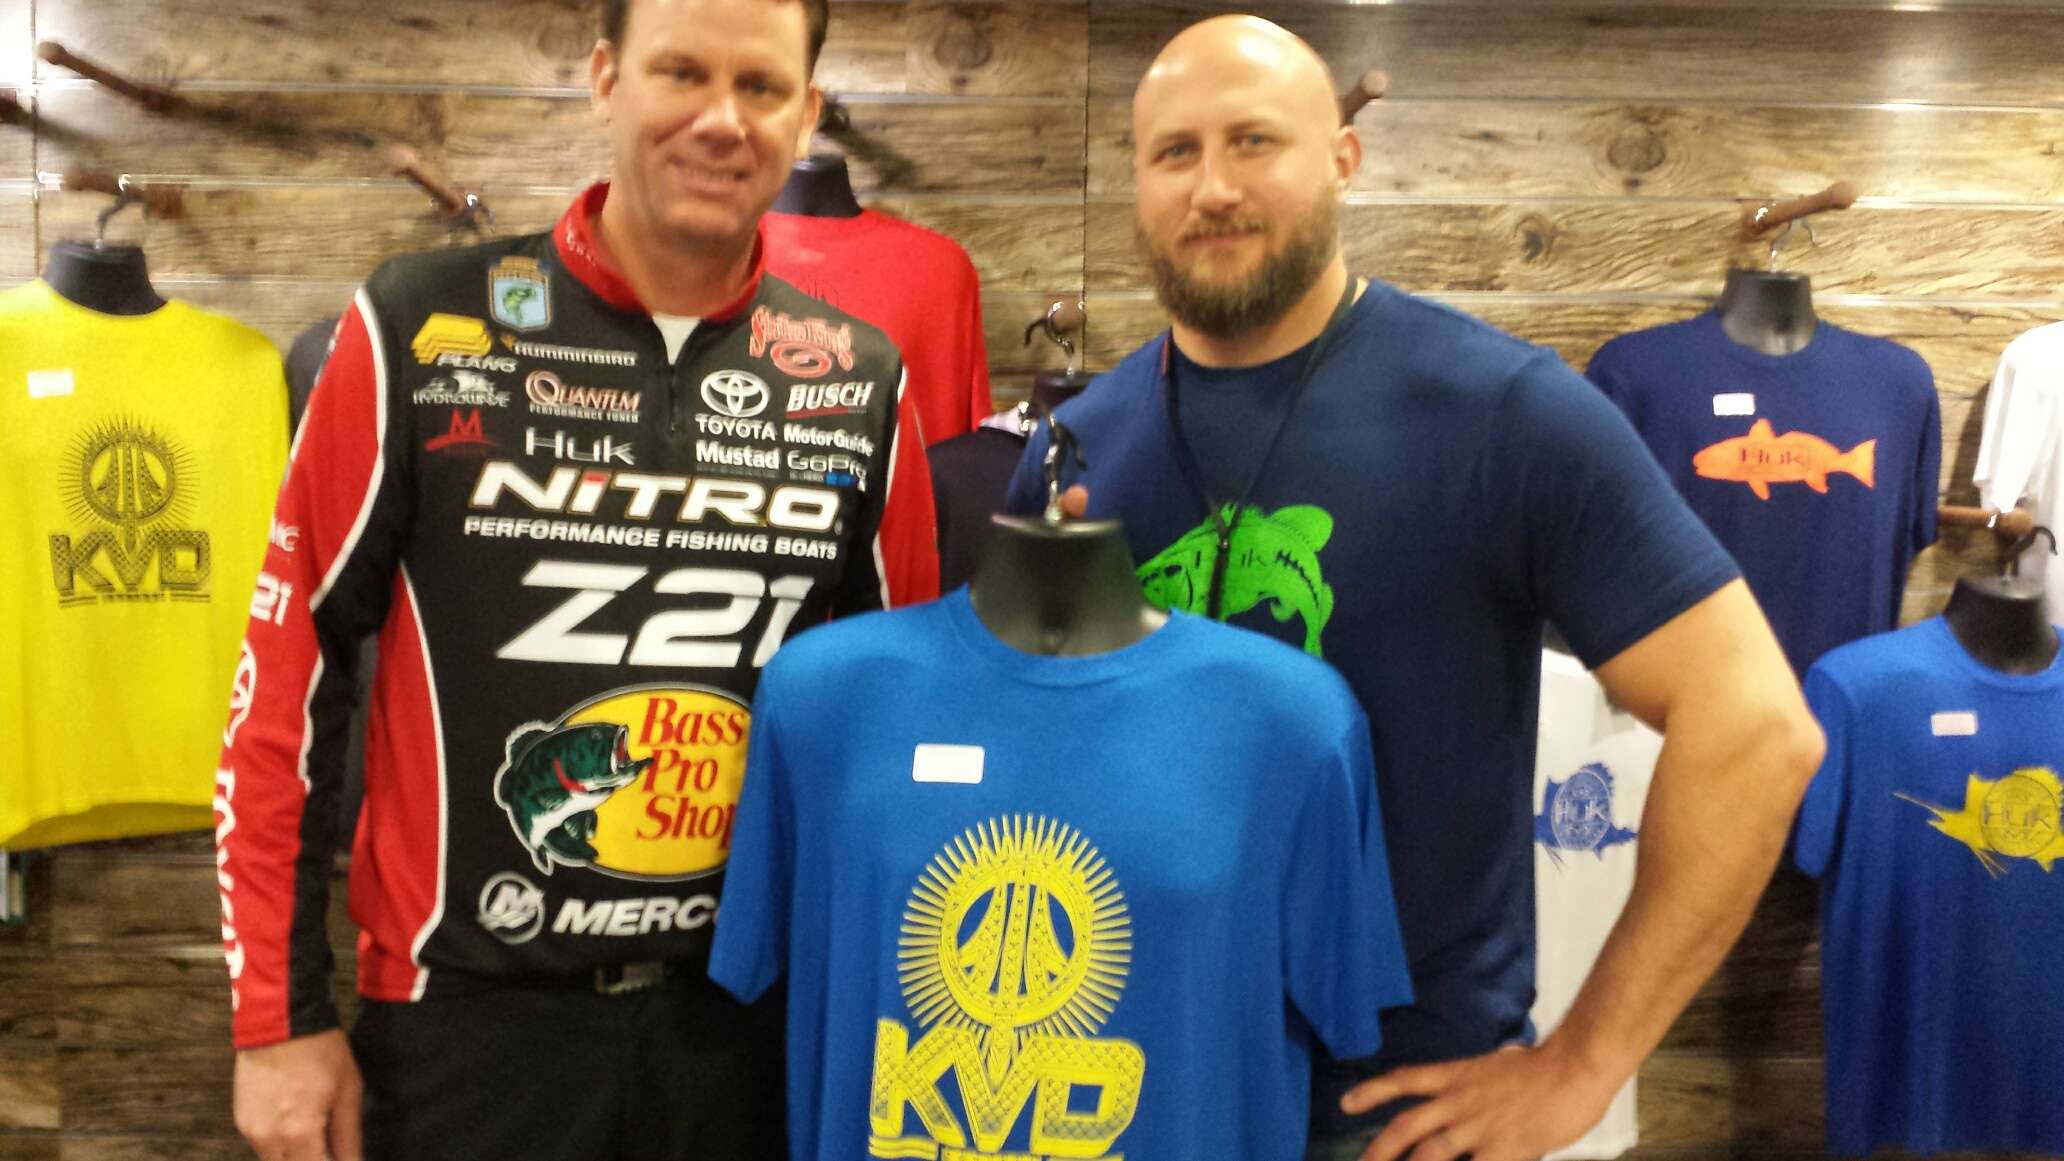 ...and made appearances in Huk's booth during the Bassmaster Classic Expo.